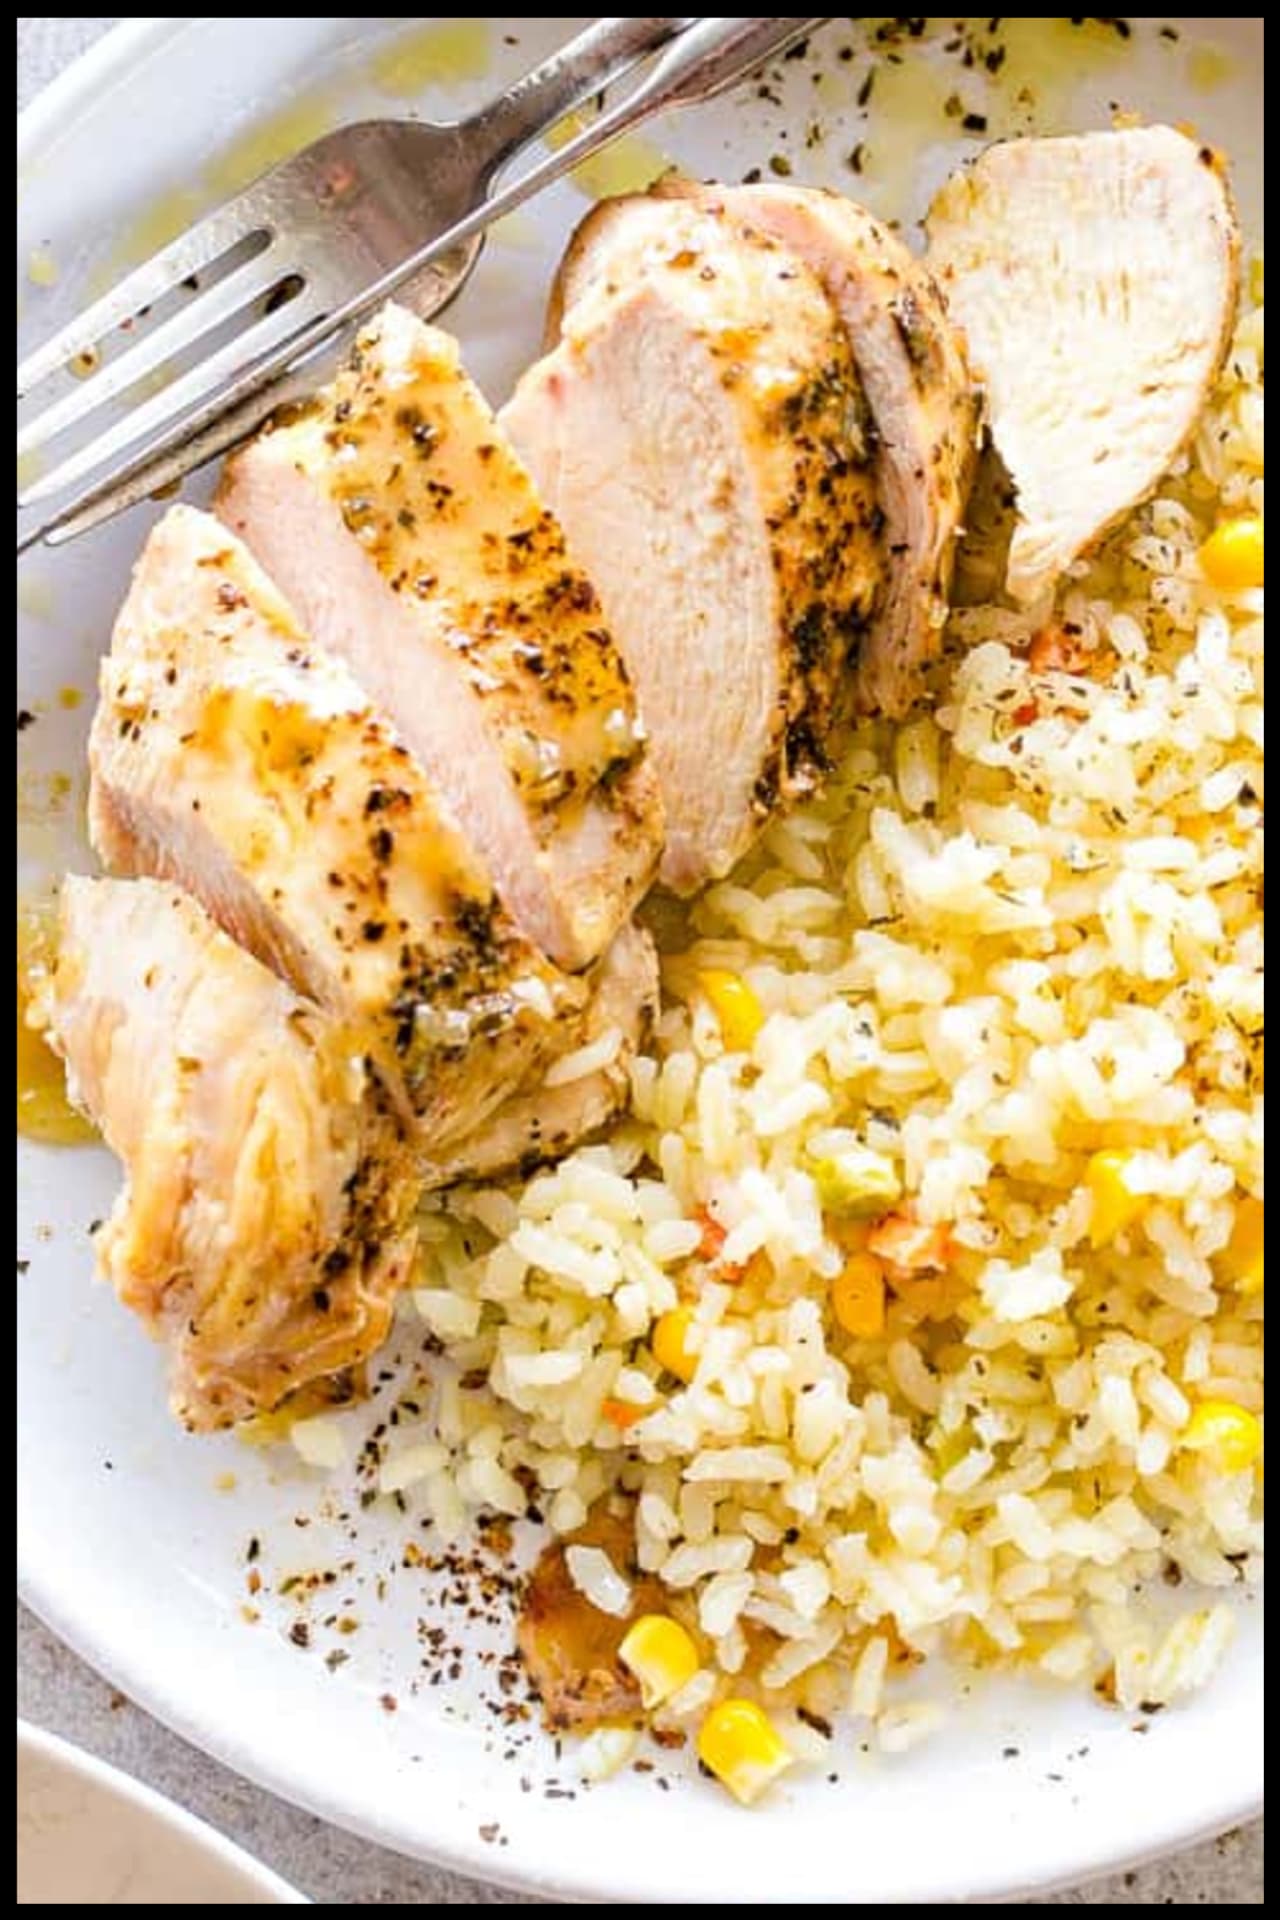 Instant Pot Chicken Recipes For Easy Weeknight Dinners - frozen chicken breast Instant Pot recipes for simple and easy meals